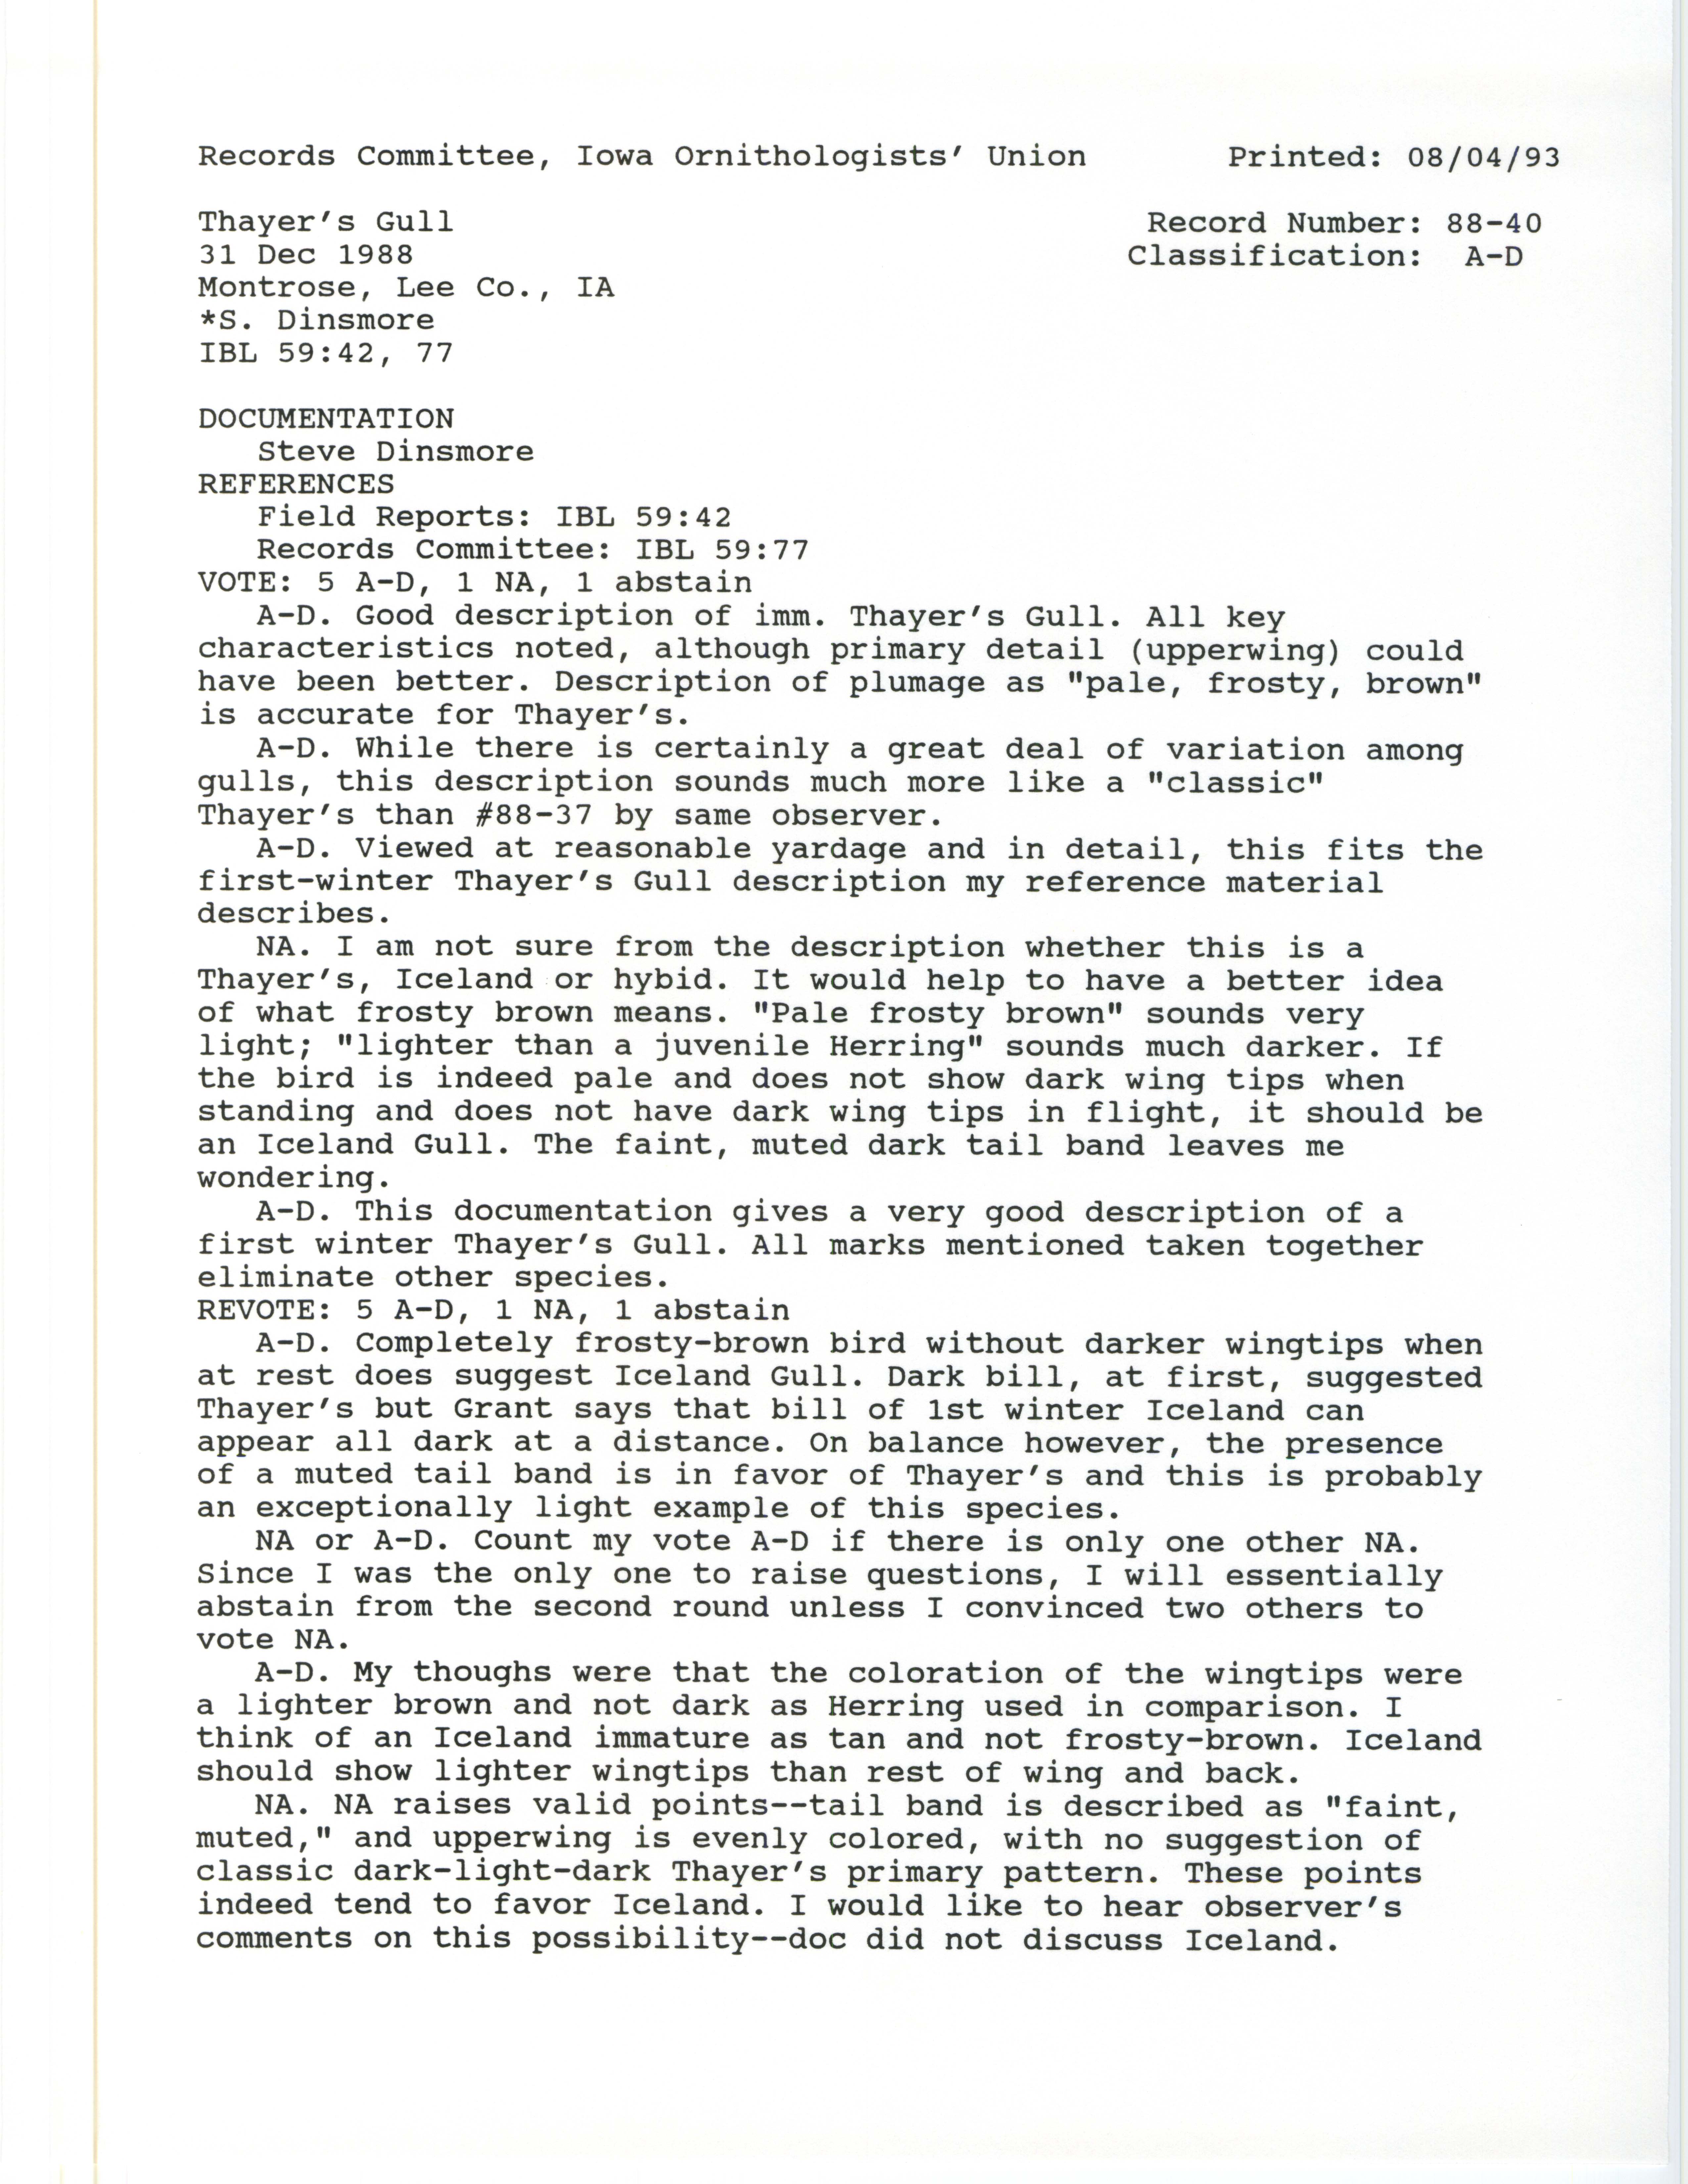 Records Committee review for rare bird sighting of Thayer's Gull at Pool 19 on the Mississippi River near Montrose, 1988